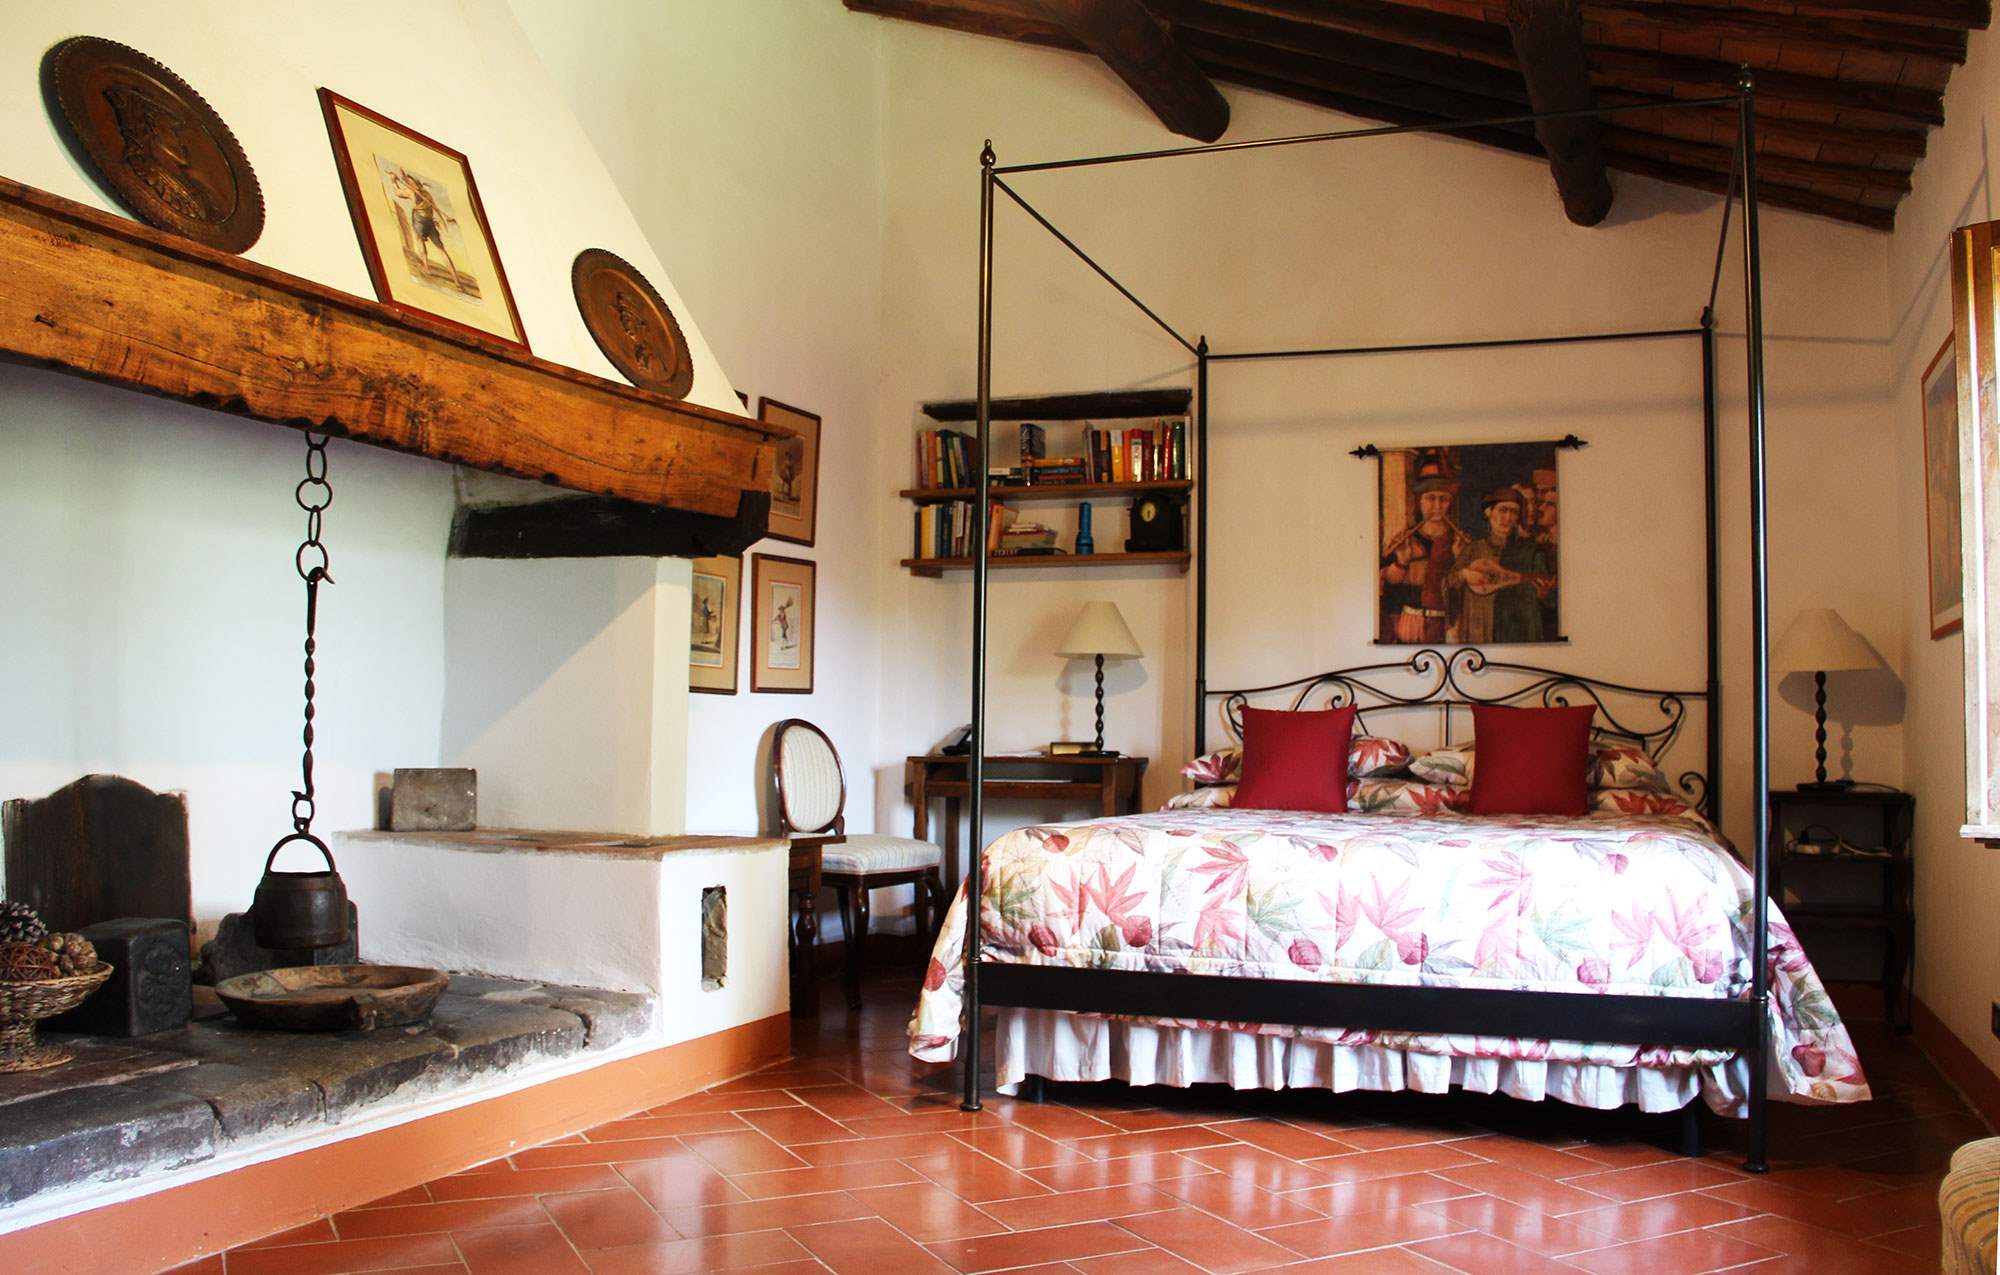 Villa Felicita, Main house and apartment, 10 persons rate, 5 bedroom villa in Chianti & Countryside, Tuscany Photo #13